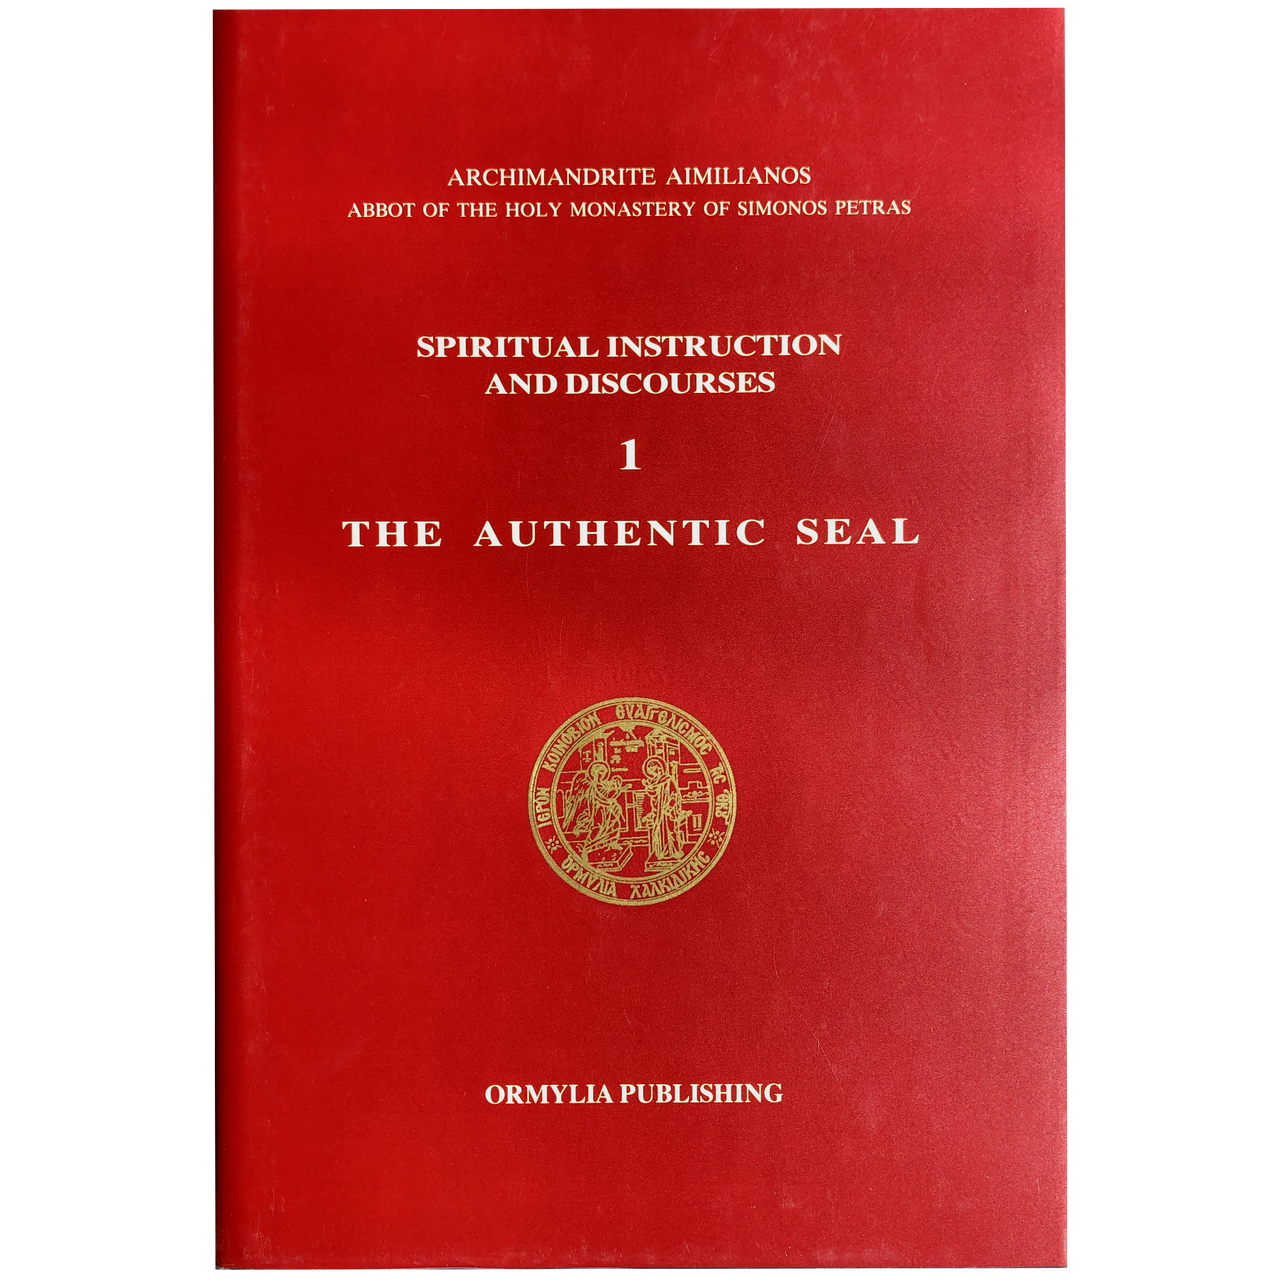 The Authentic Seal